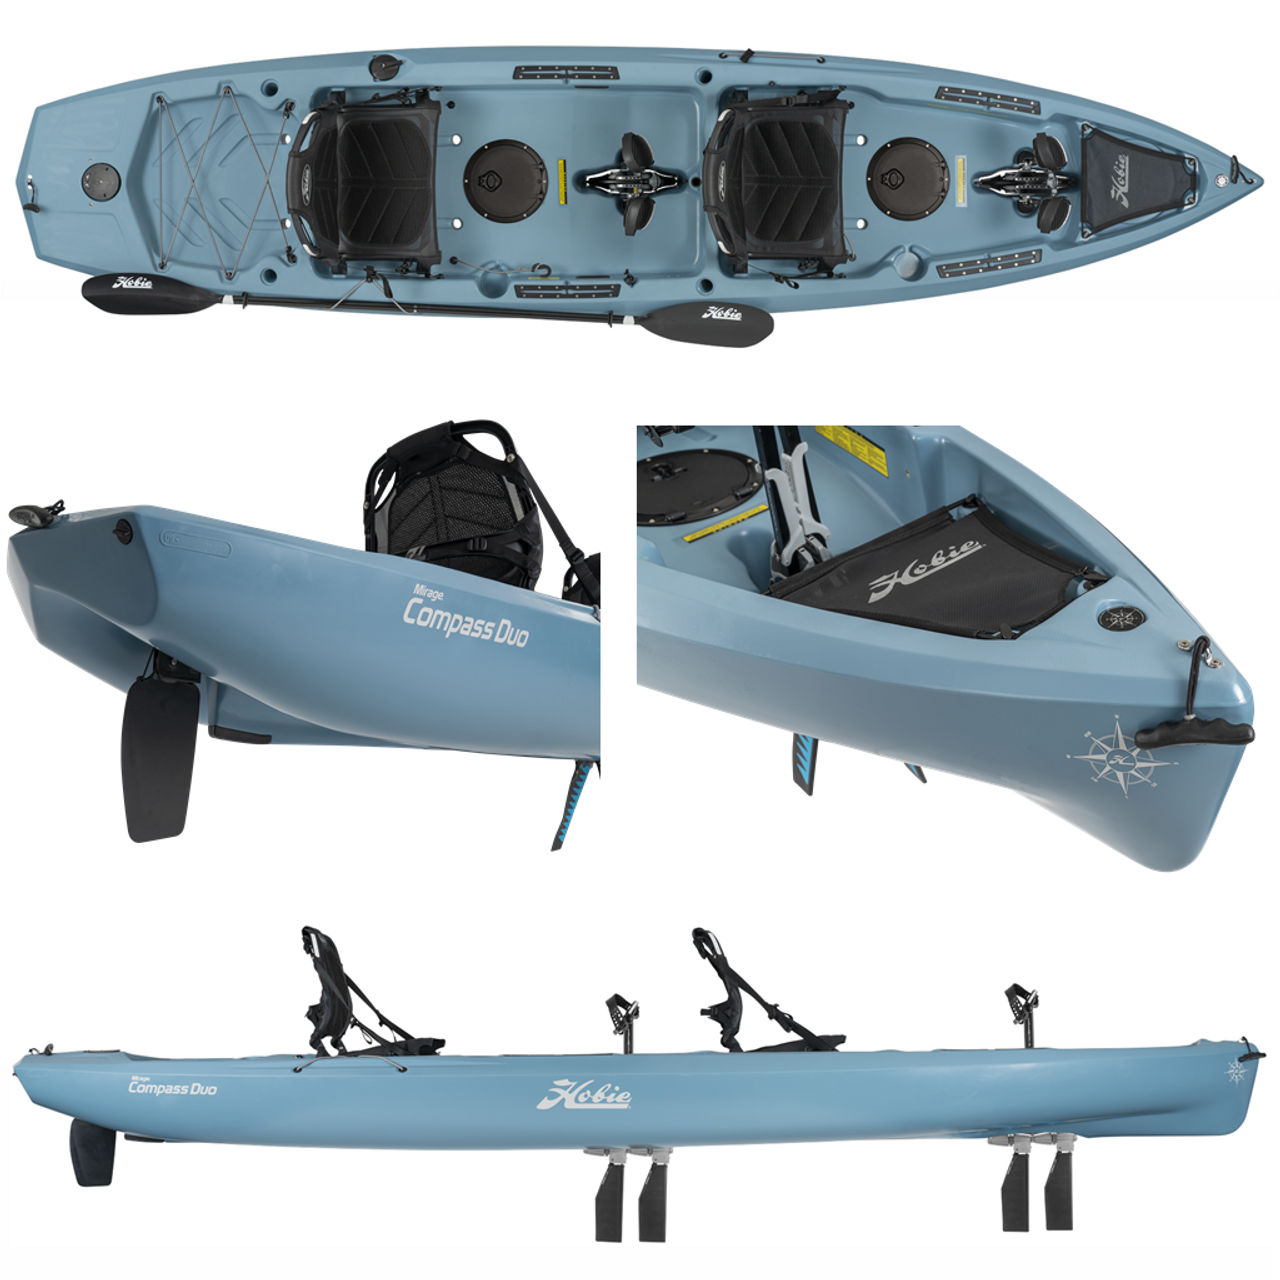 https://cdn11.bigcommerce.com/s-f3xbgyp2hq/images/stencil/1280x1280/products/2587/20860/Hobie_Mirage_Compass_Duo_Tandem_Two_Person_Pedal_Drive_Fishing_Kayak_Collage_Kayak_City_Slate__94902.1697142804.png?c=2